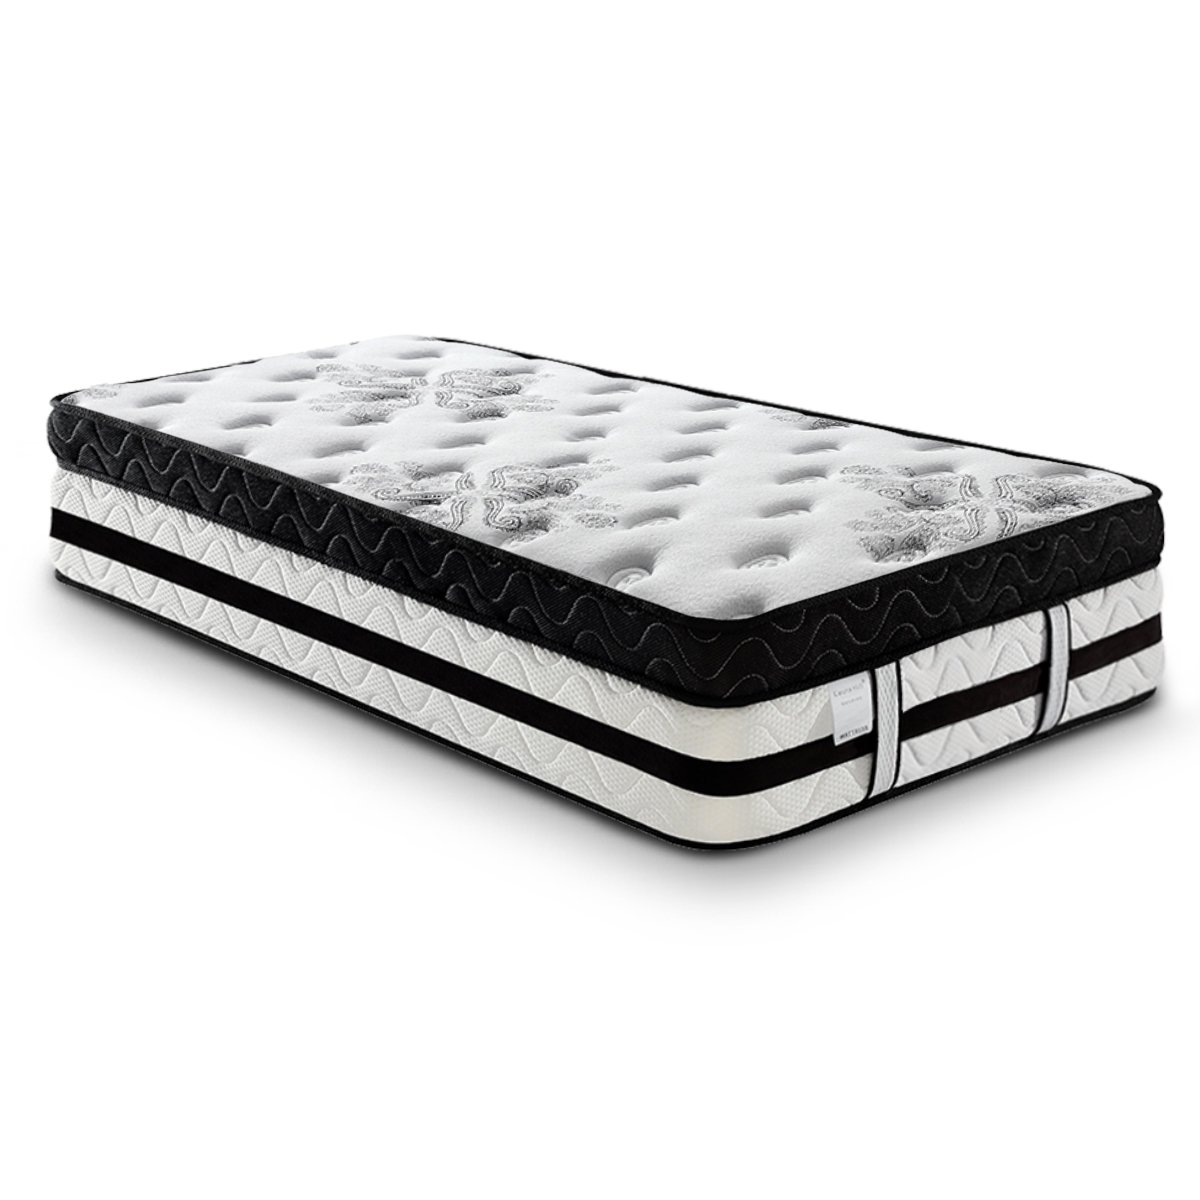 Laura Hill King Single Mattress with Euro Top - 34cm 1